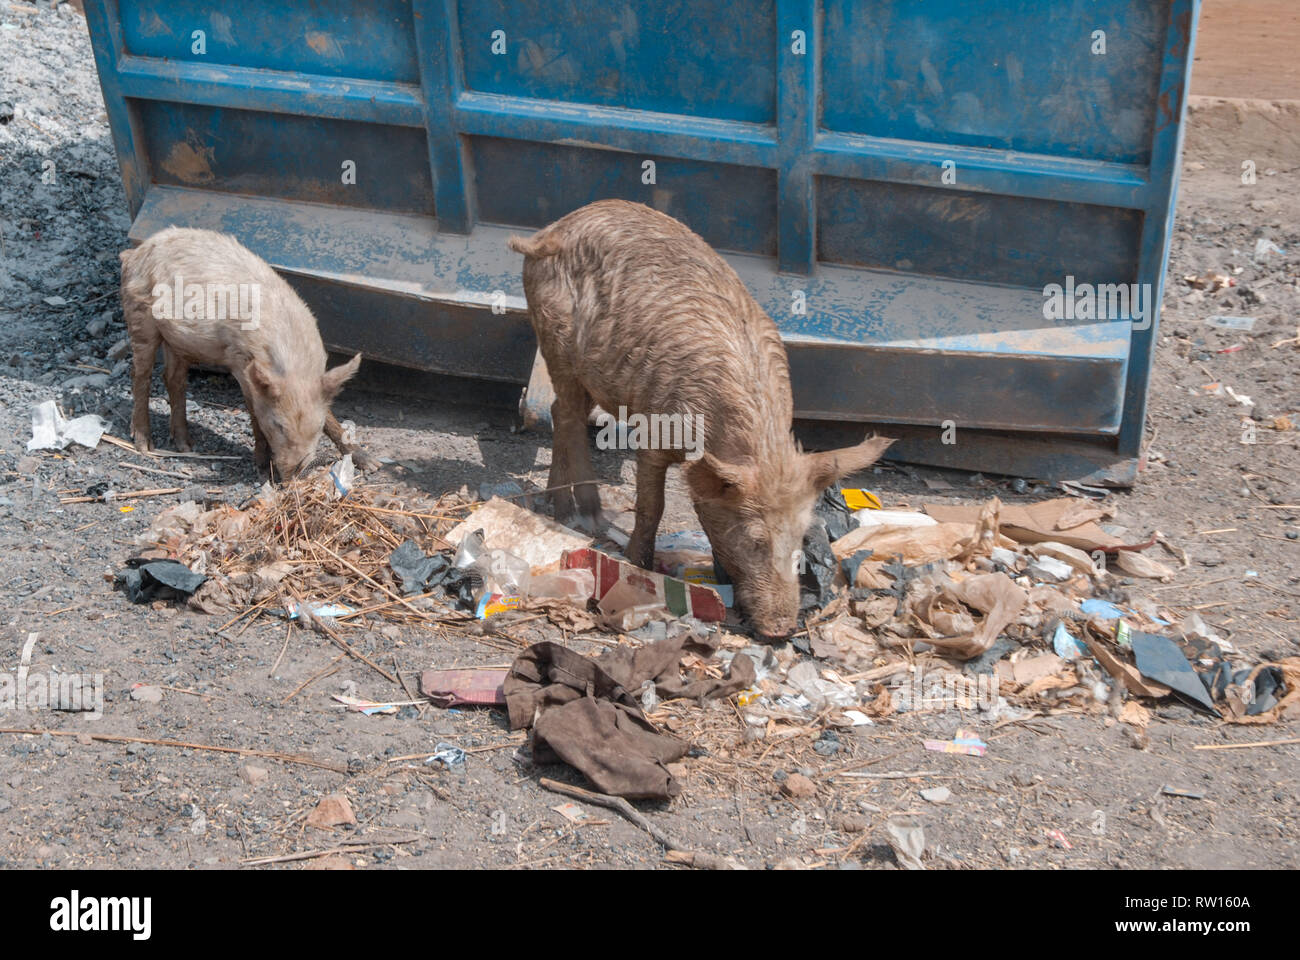 A photo of two dirty domestic pigs eating garbage next to a blue garbage container in Elmina, Ghana Stock Photo